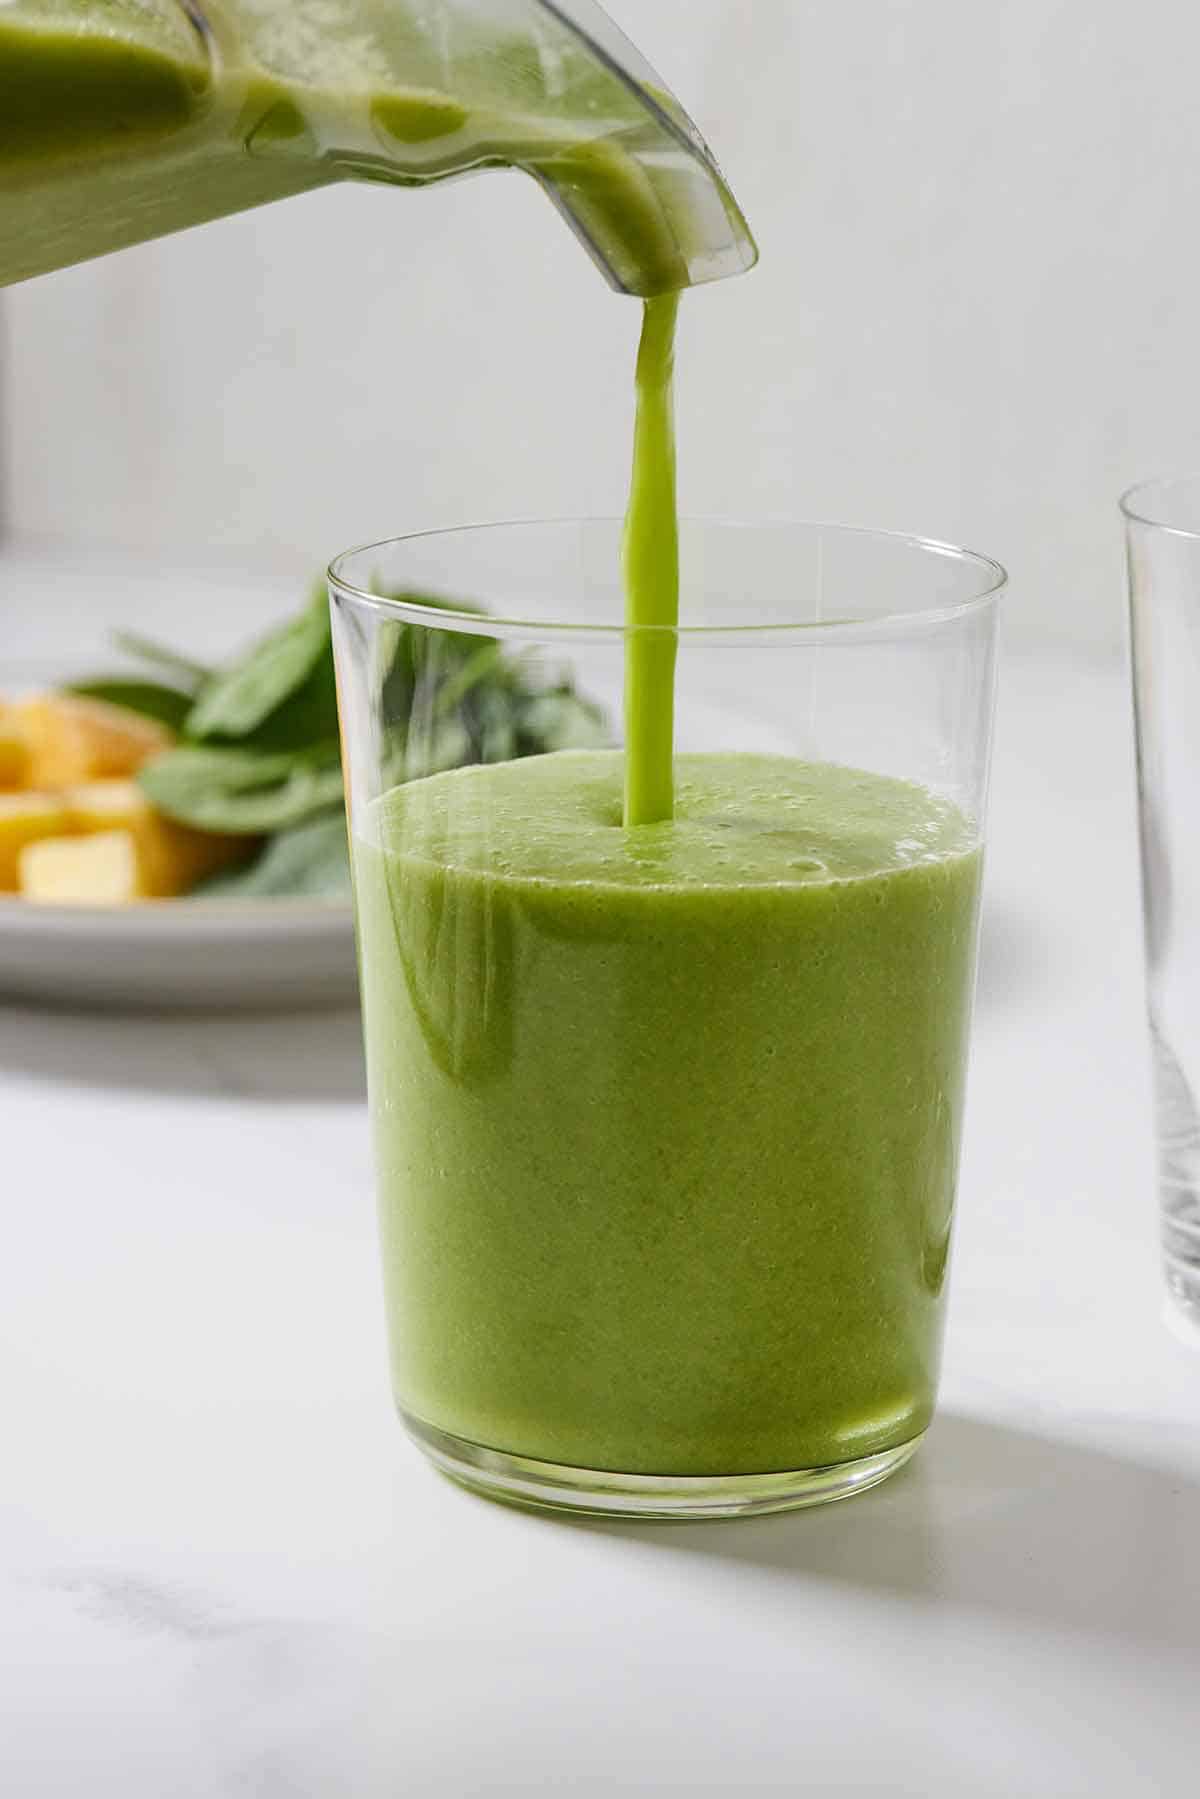 Green smoothie being poured into a glass from a blender.